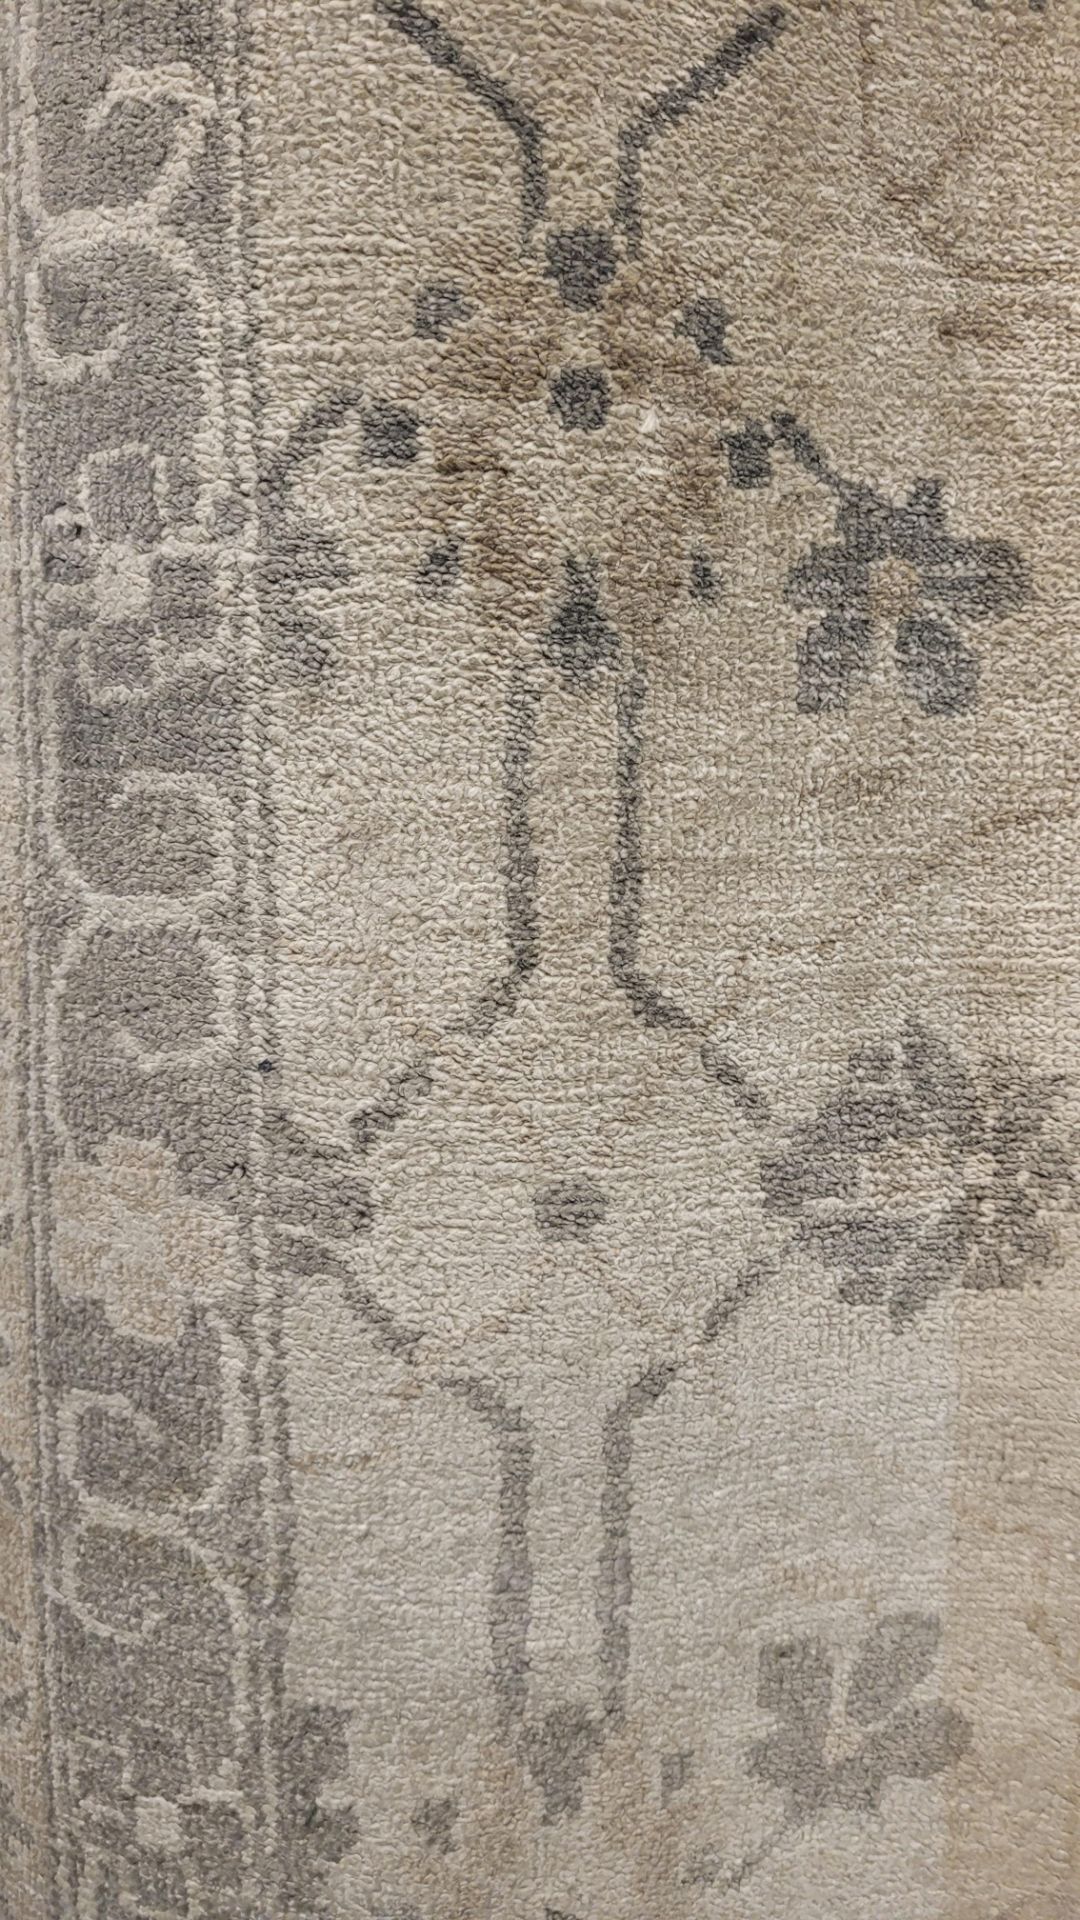 12' X 15' BAMBOO SILK HAND KNOTTED IN INDIA - MSRP $12,999.00 - INVENTORY CODE: DREAM 216142 IV/ - Image 5 of 6